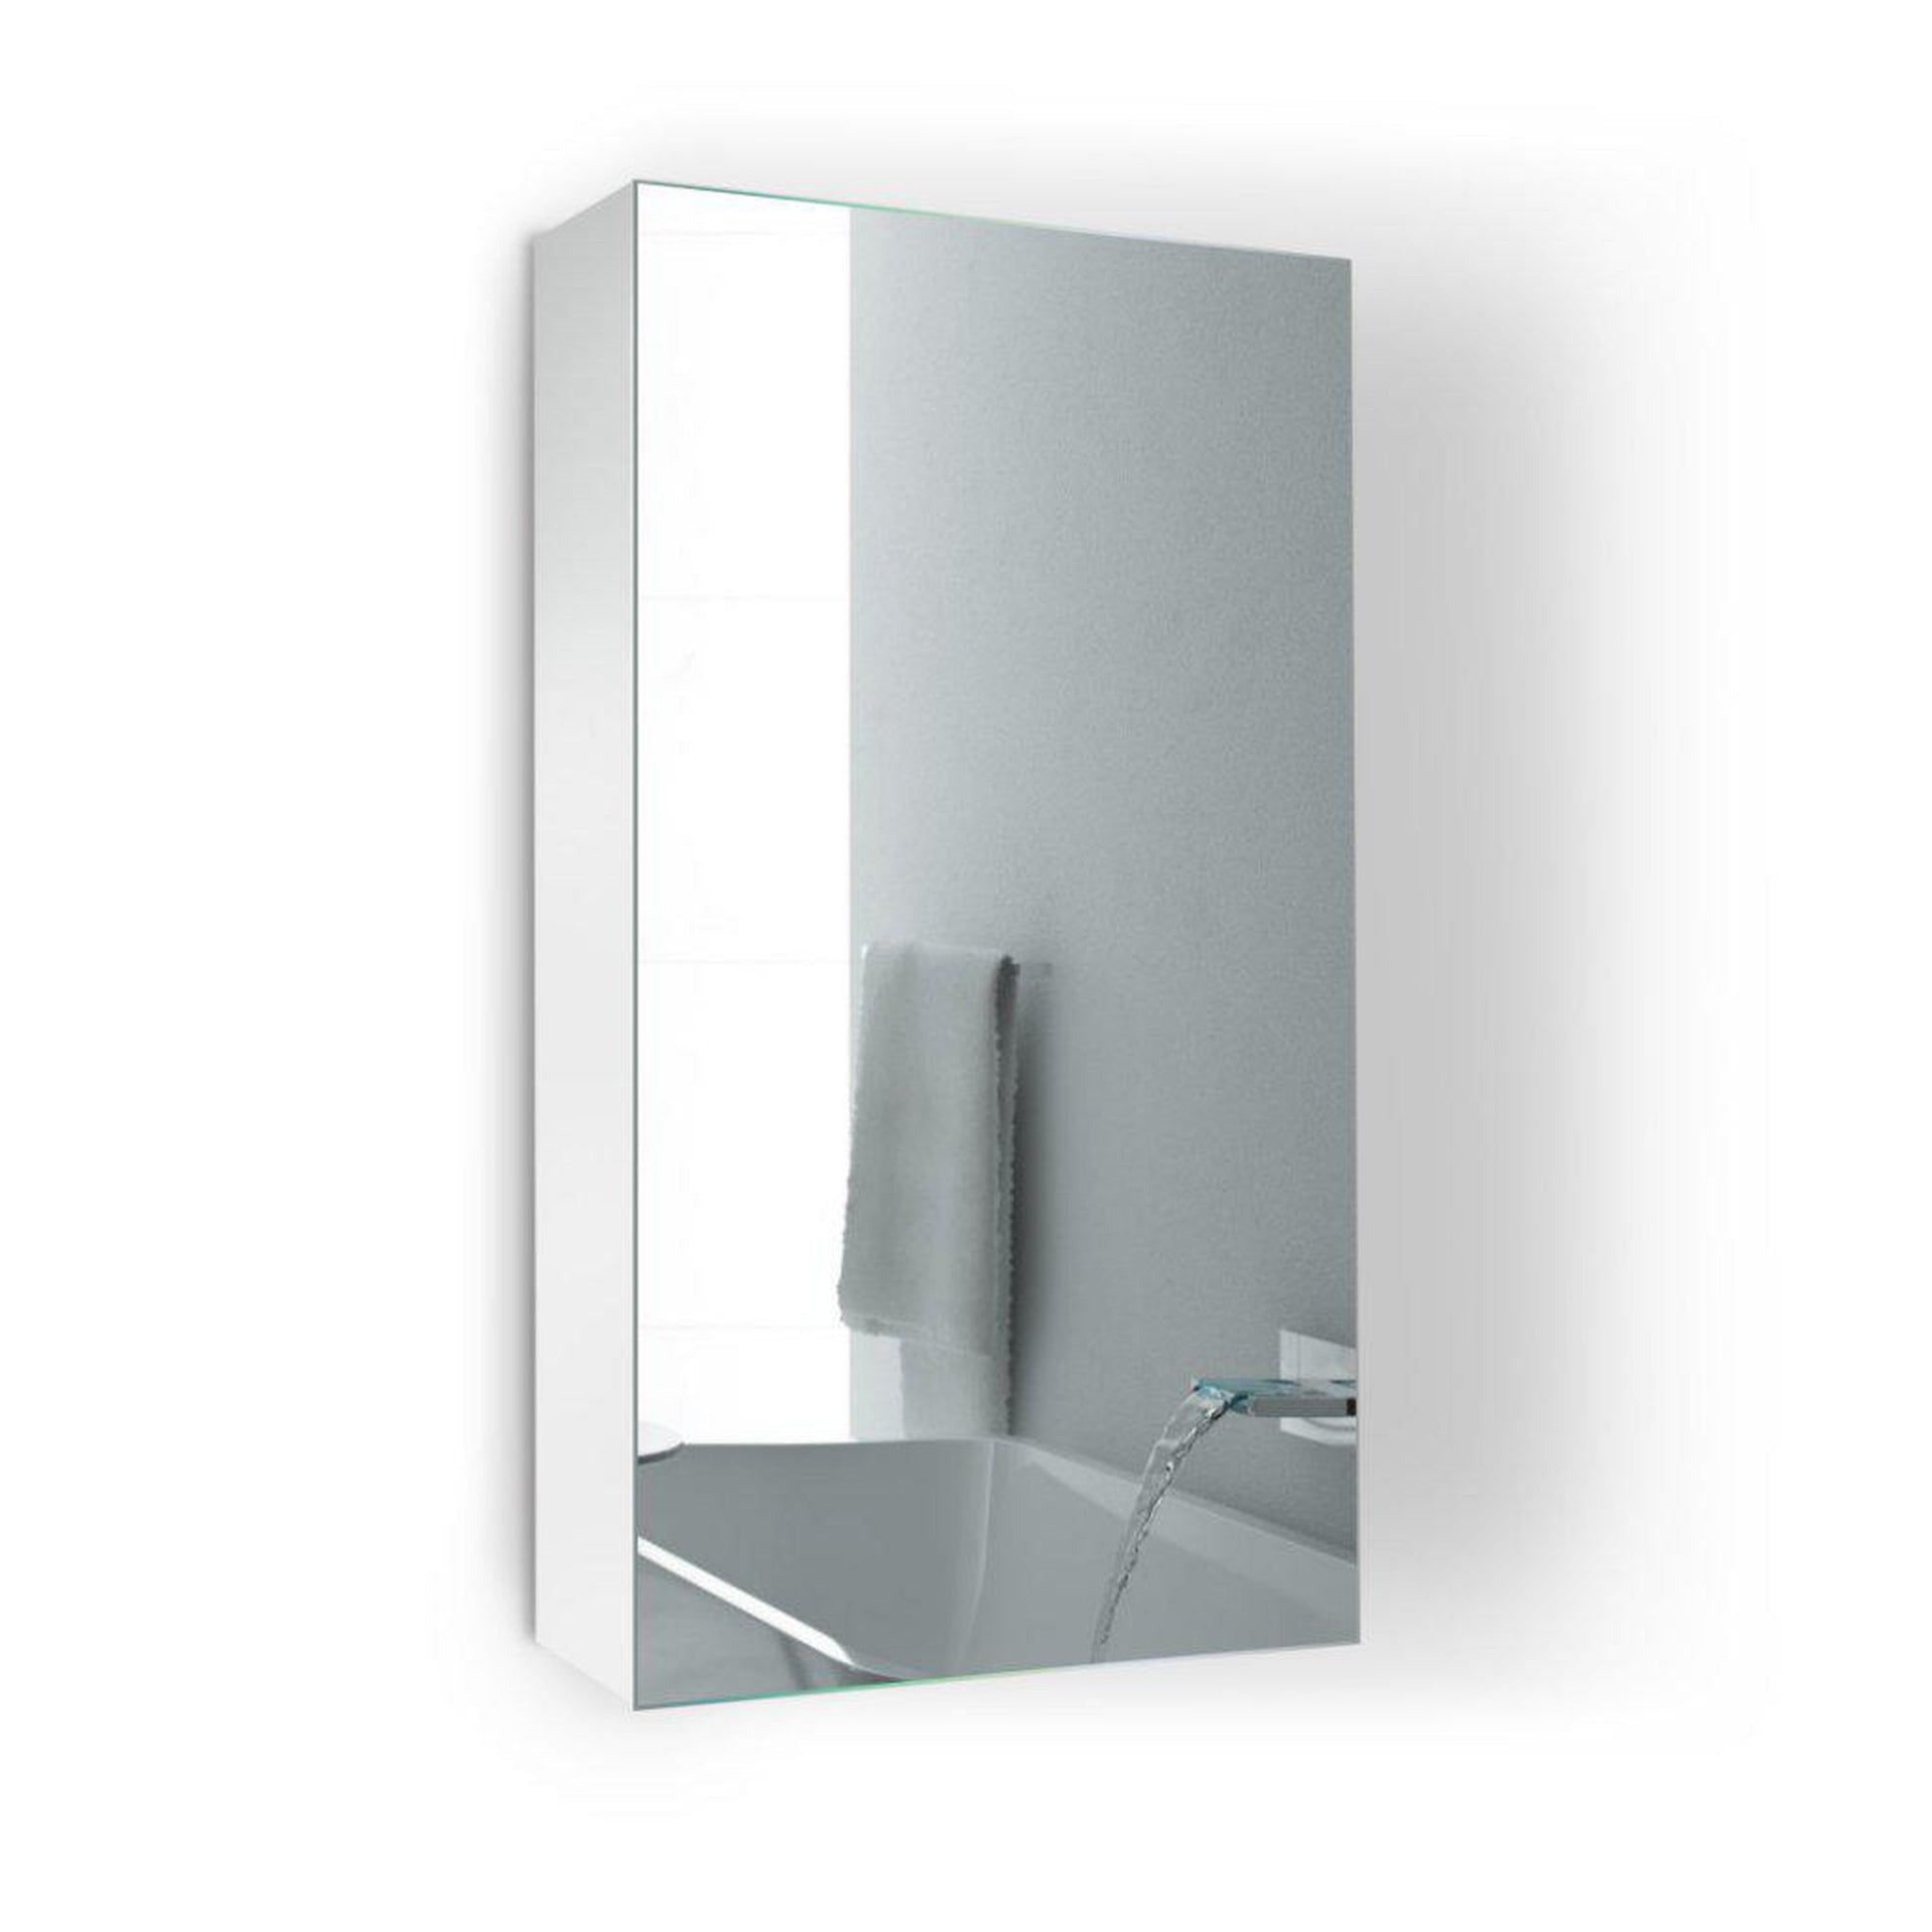 Krugg Reflections Plaza 16" x 30" Single Left Opening Rectangular Recessed/Surface-Mount Medicine Cabinet Mirror With Three Adjustable Shelves